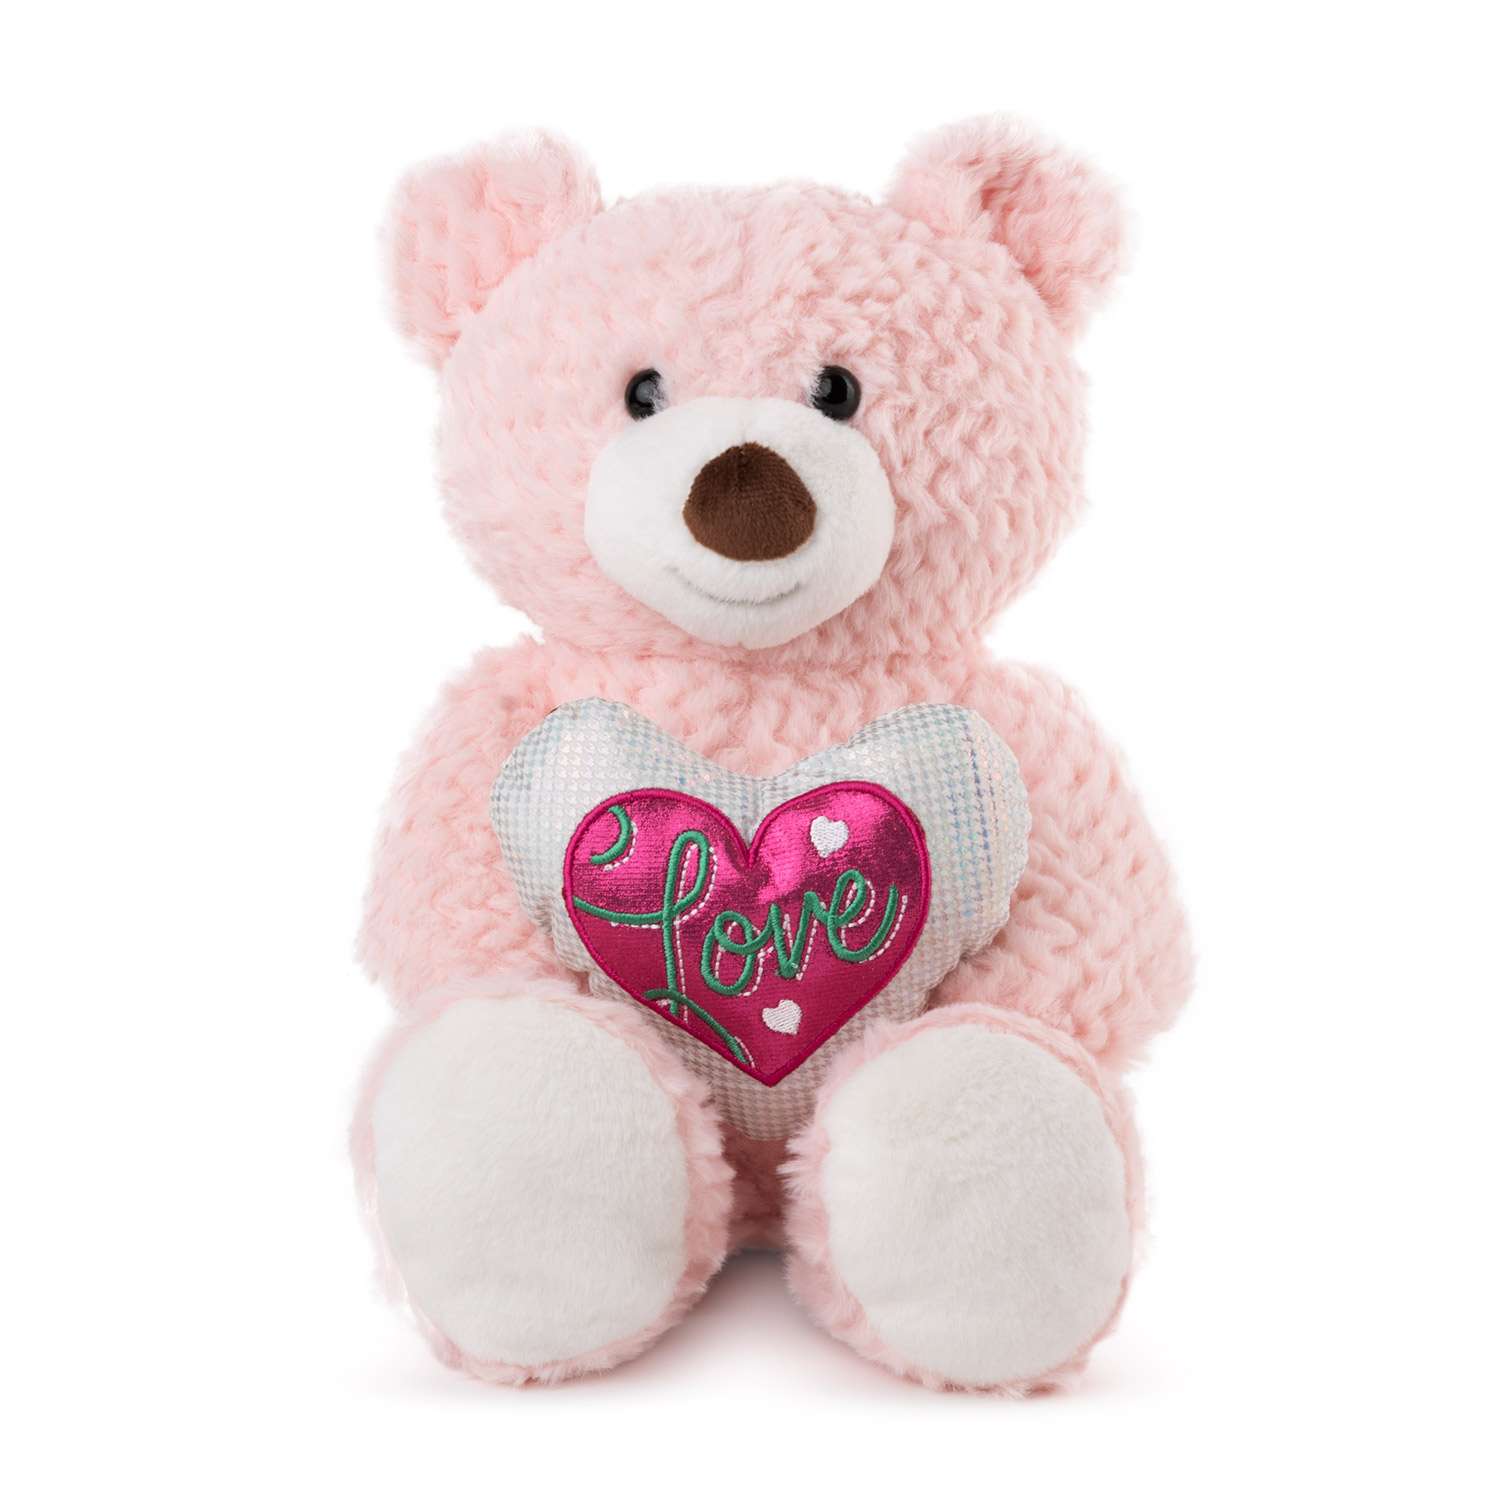 Bear with heart - Pink